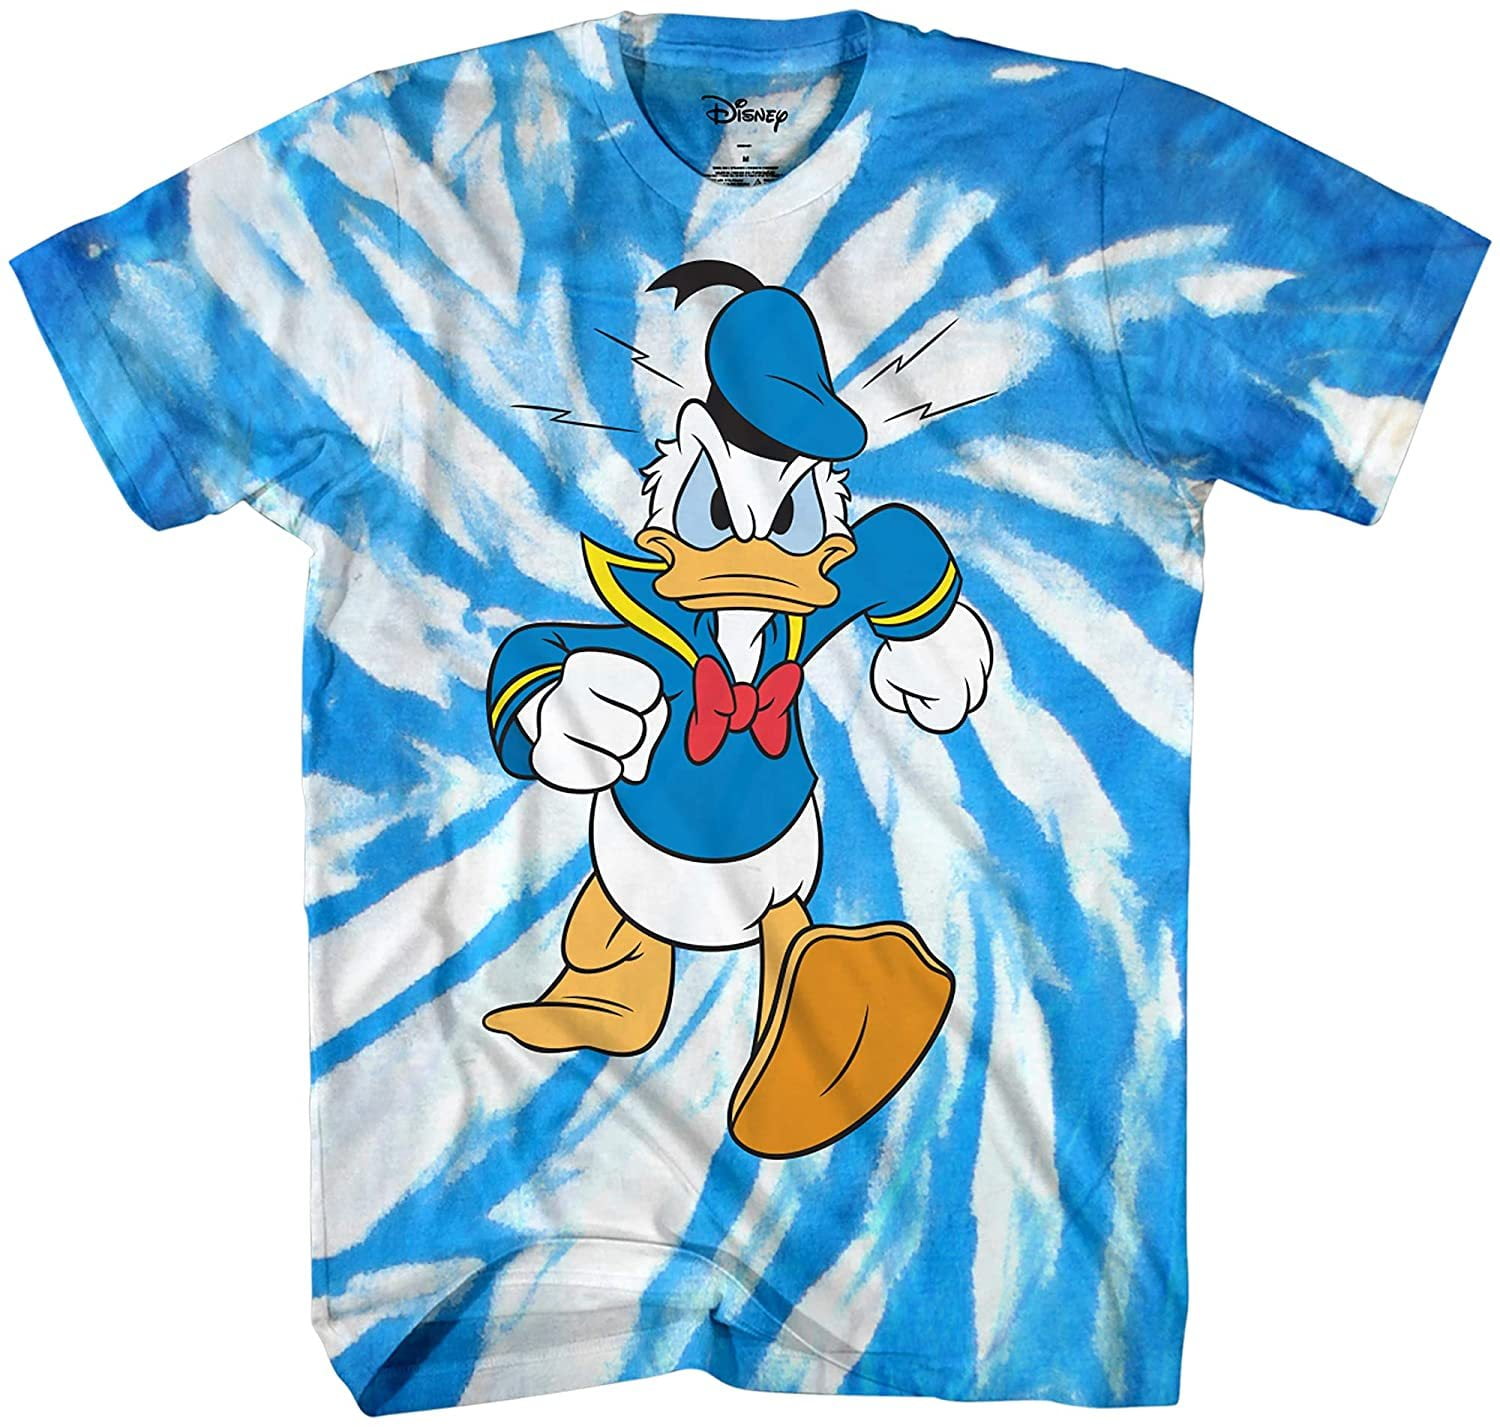 Donald Duck Birthday 2023 White T-Shirt for Adults